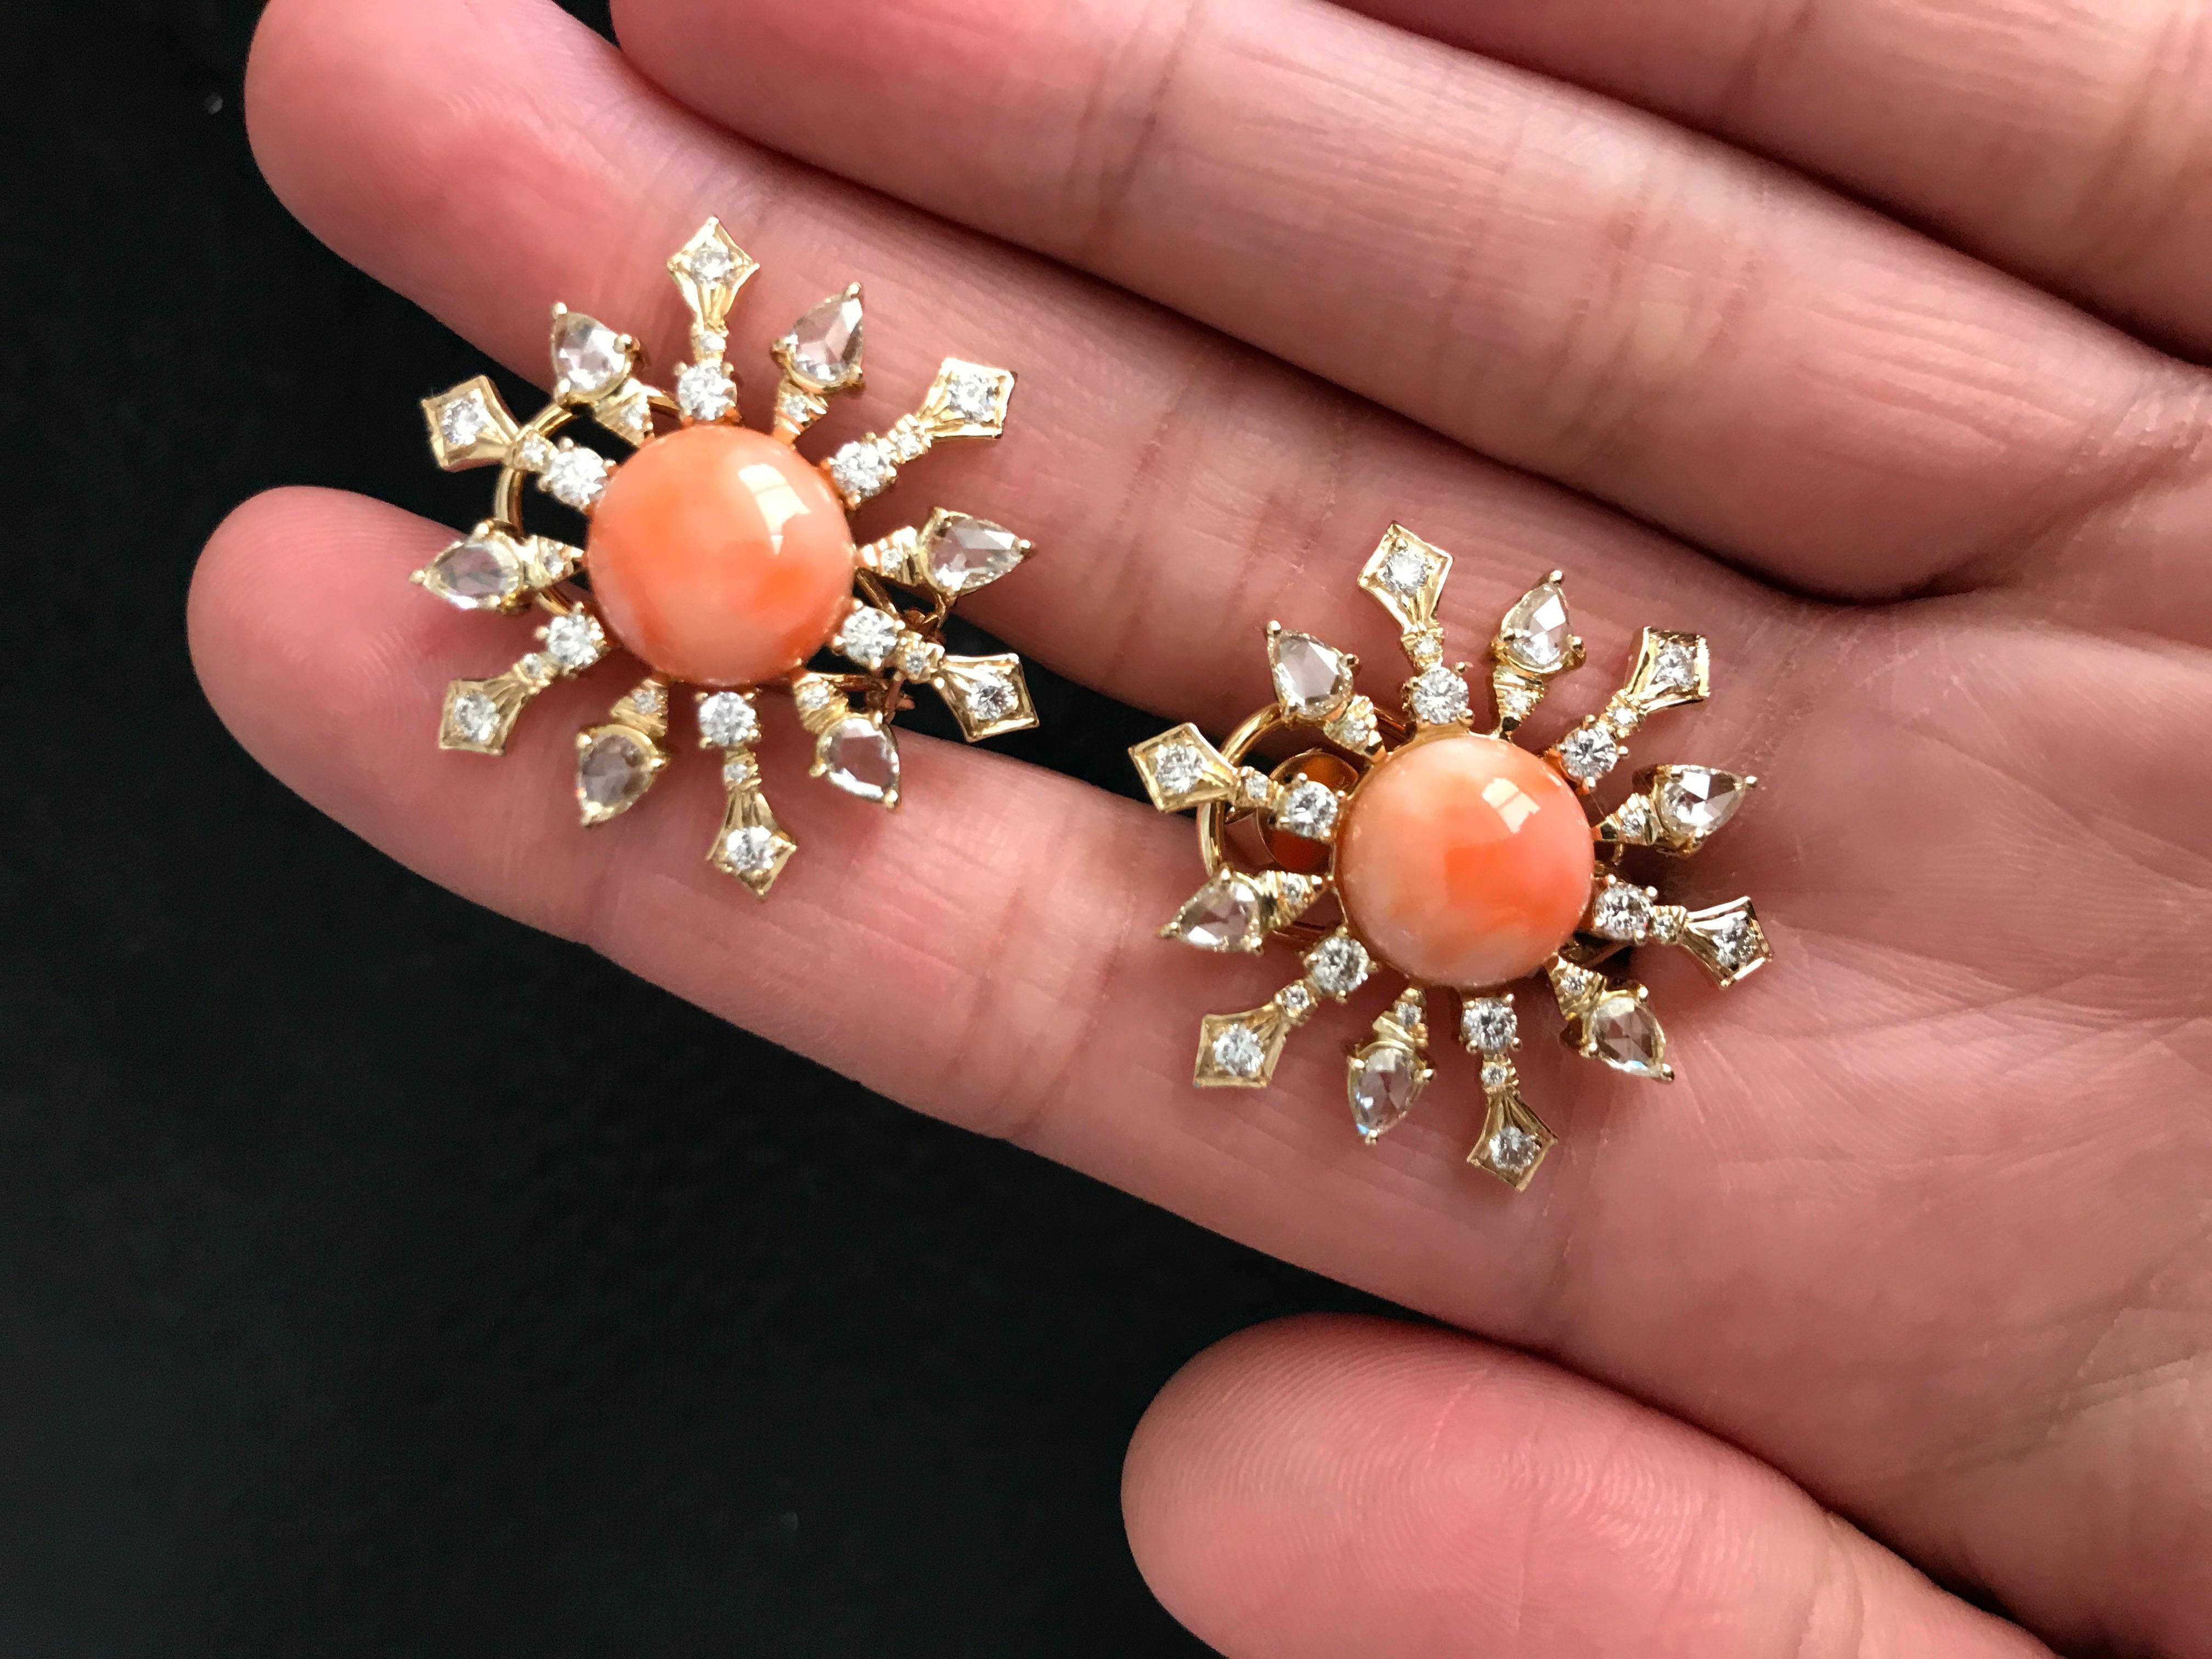 A very unique pair of statement stud earrings, using high-quality round-shape Italian Coral and rose cut / full cut Diamonds, all set in 18K yellow gold. 

Material Details:

Stone: Italian Coral
Weight: 8.51 carats
Shape: Round

Diamonds:
Weight: